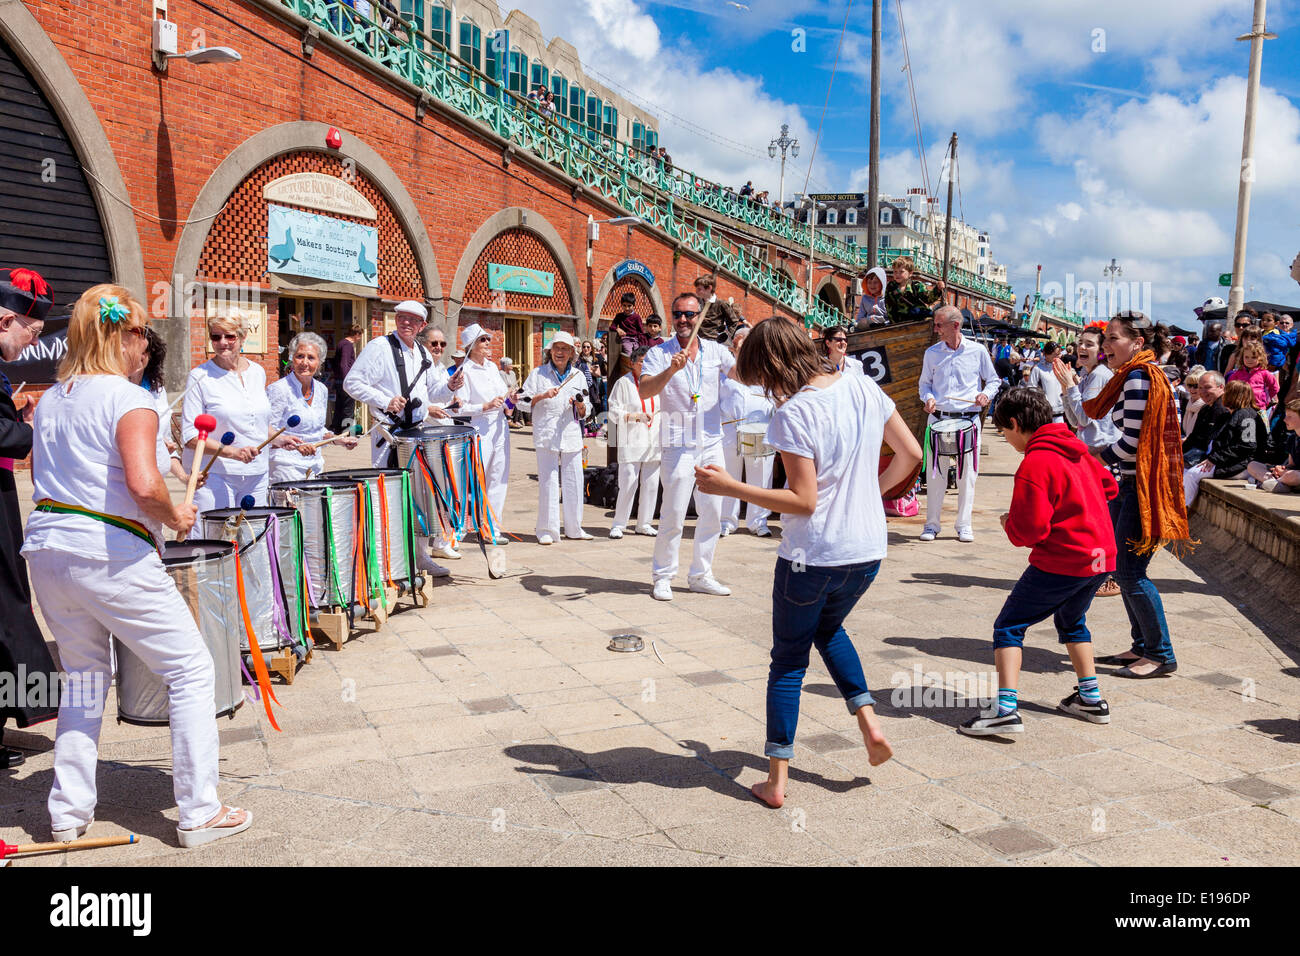 Children Dancing To The Silver Sounds Samba Band At The Mackerel Fayre, Brighton Seafront, Sussex, England Stock Photo